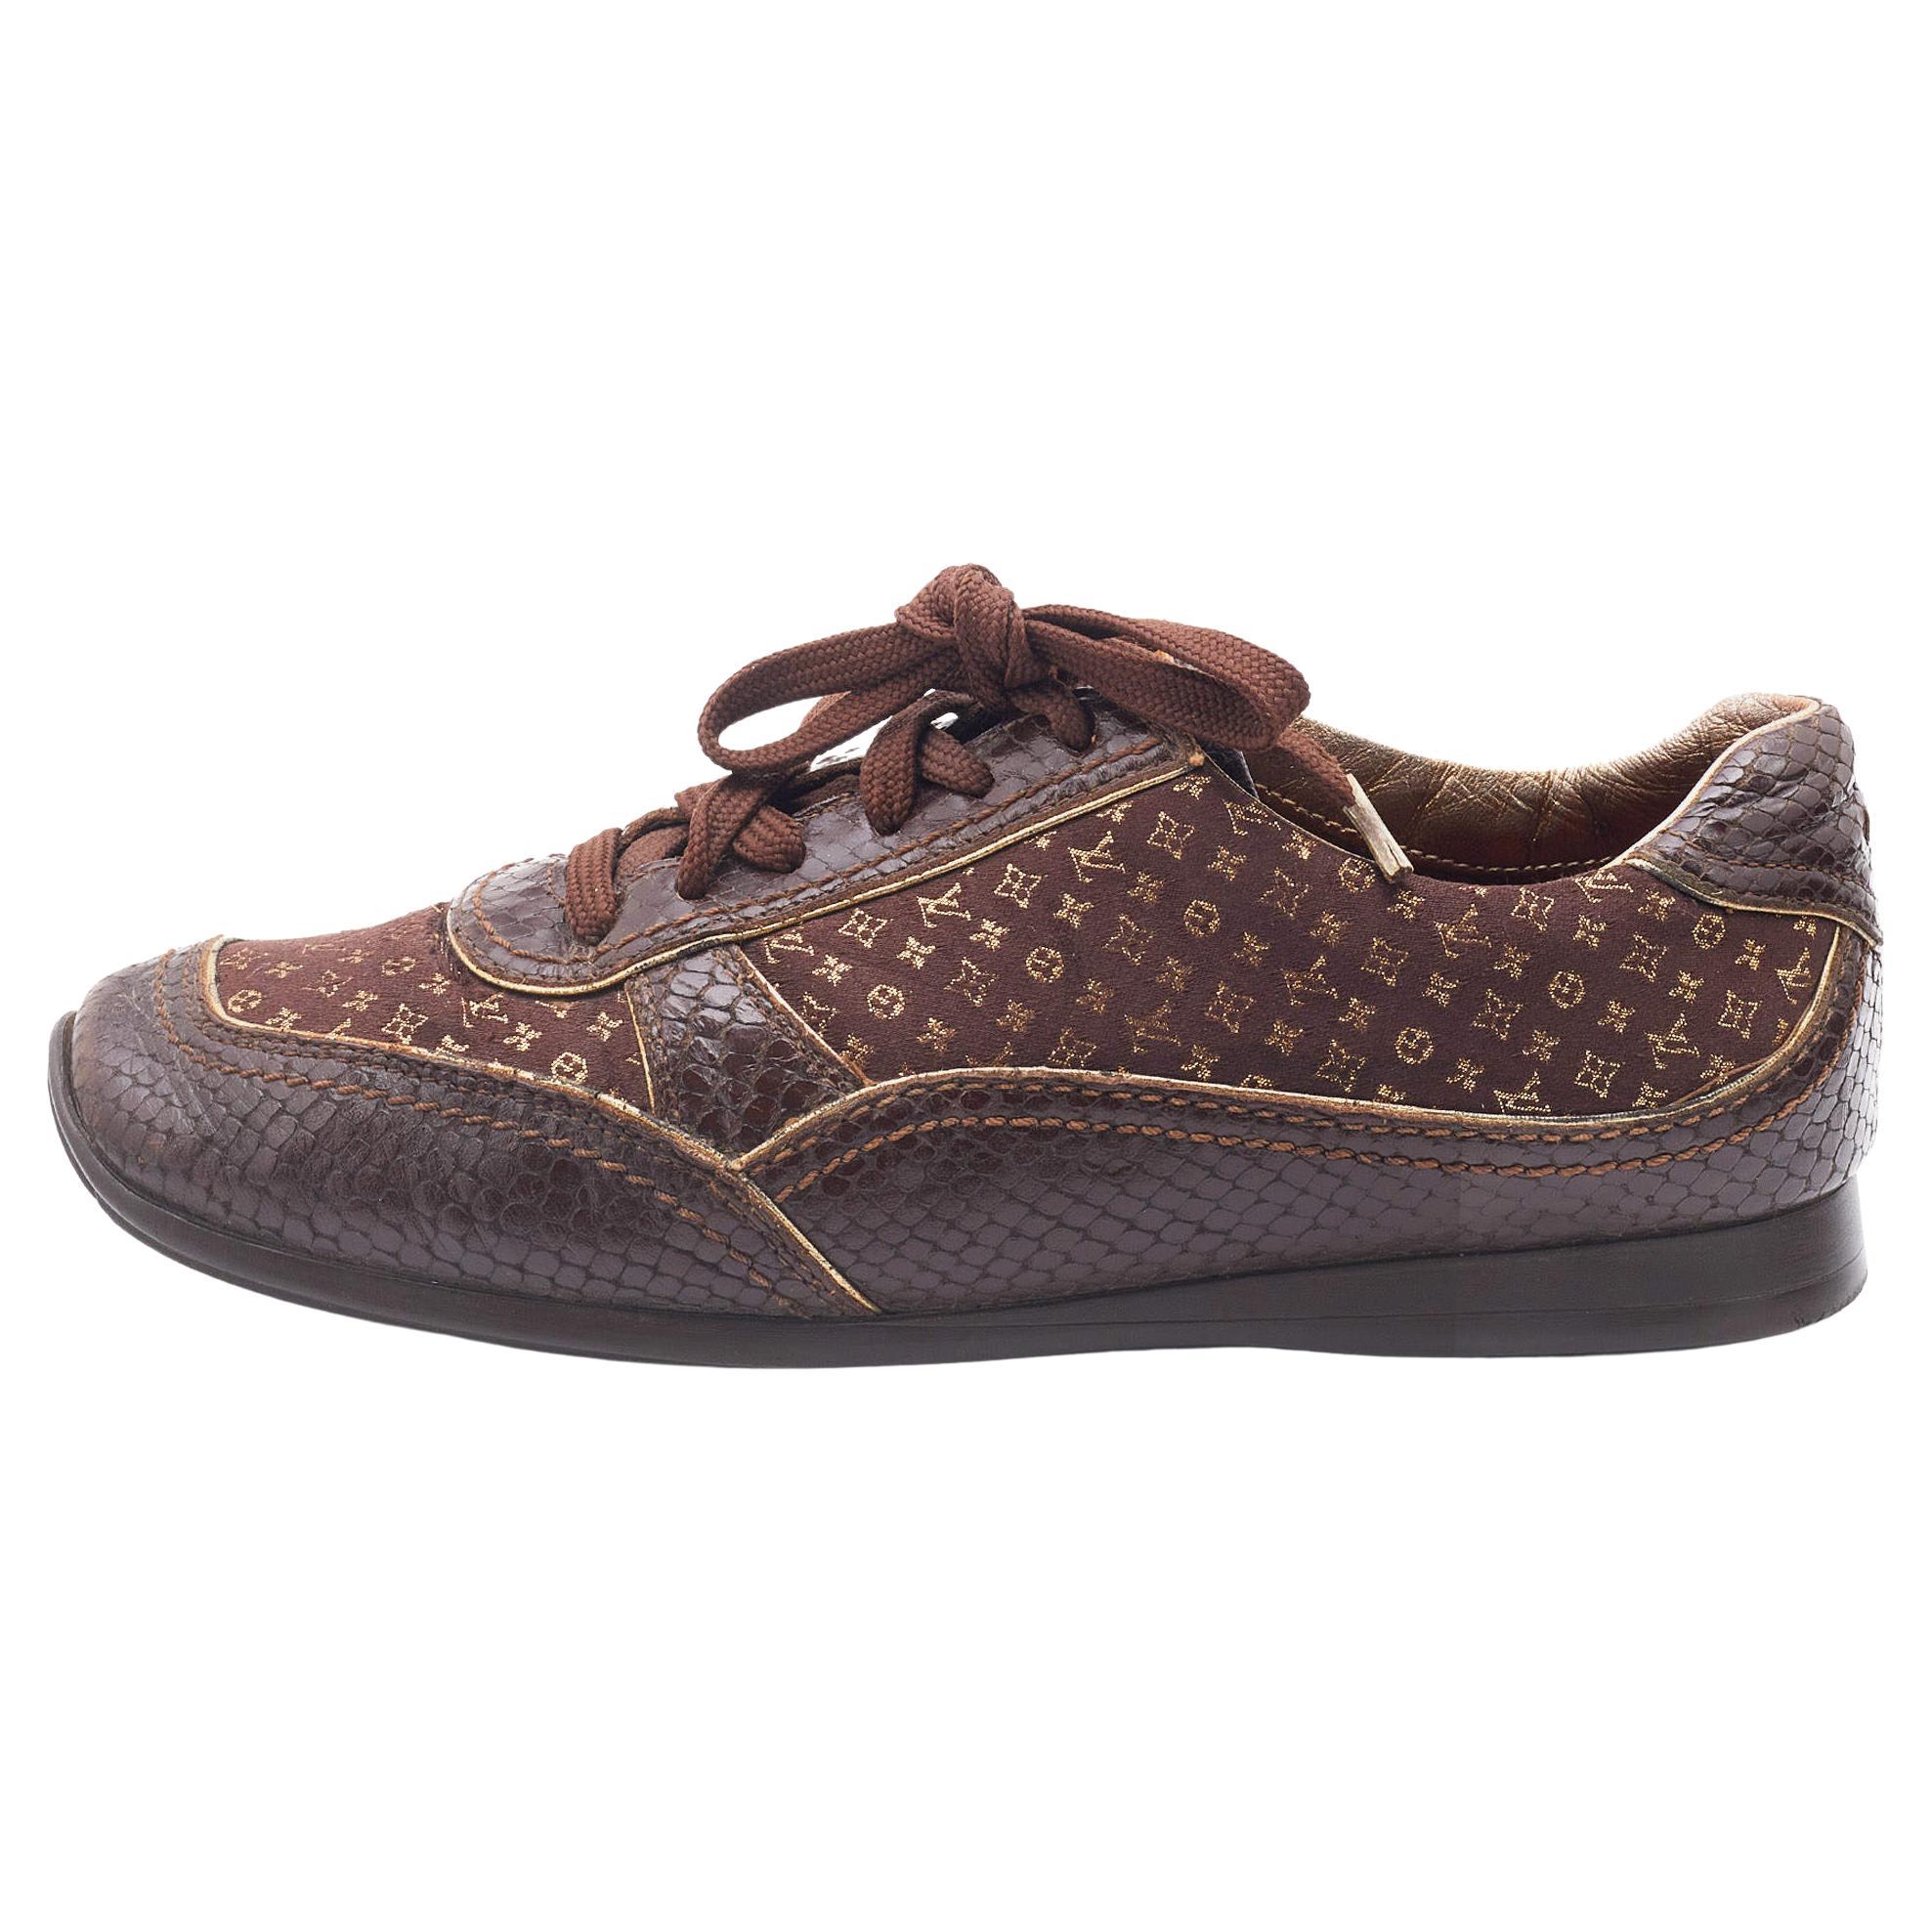 Louis Vuitton Brown Suede And Monogram Satin Low Top Sneakers Size 37.5 Louis  Vuitton